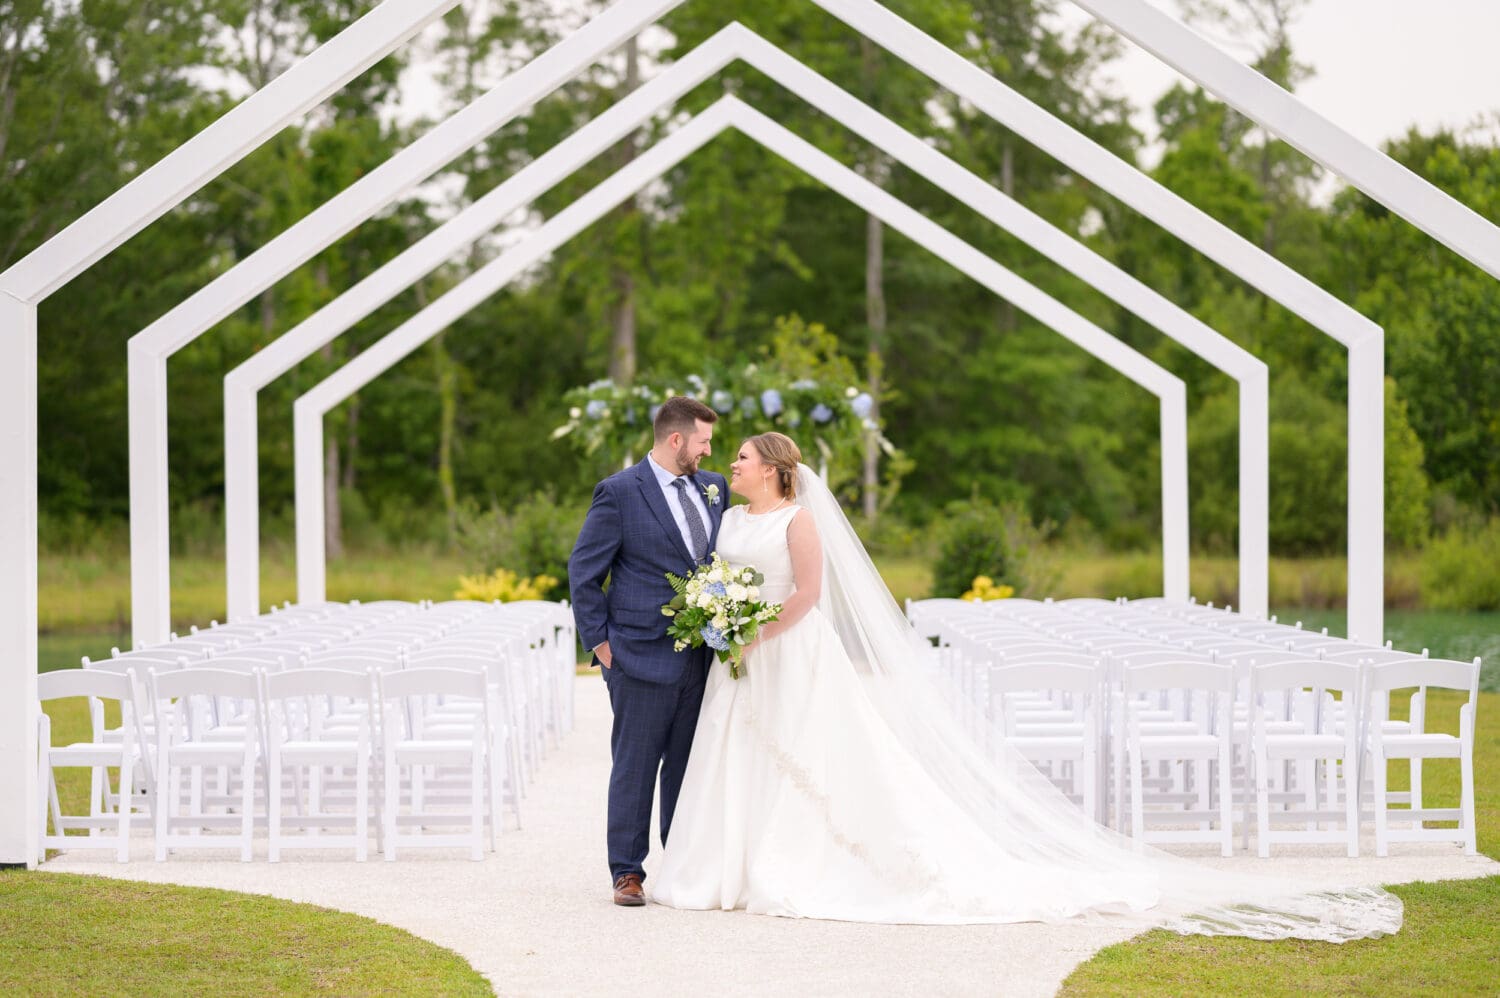 Portraits of the bride and groom under the ceremony arches - The Venue at White Oaks Farm